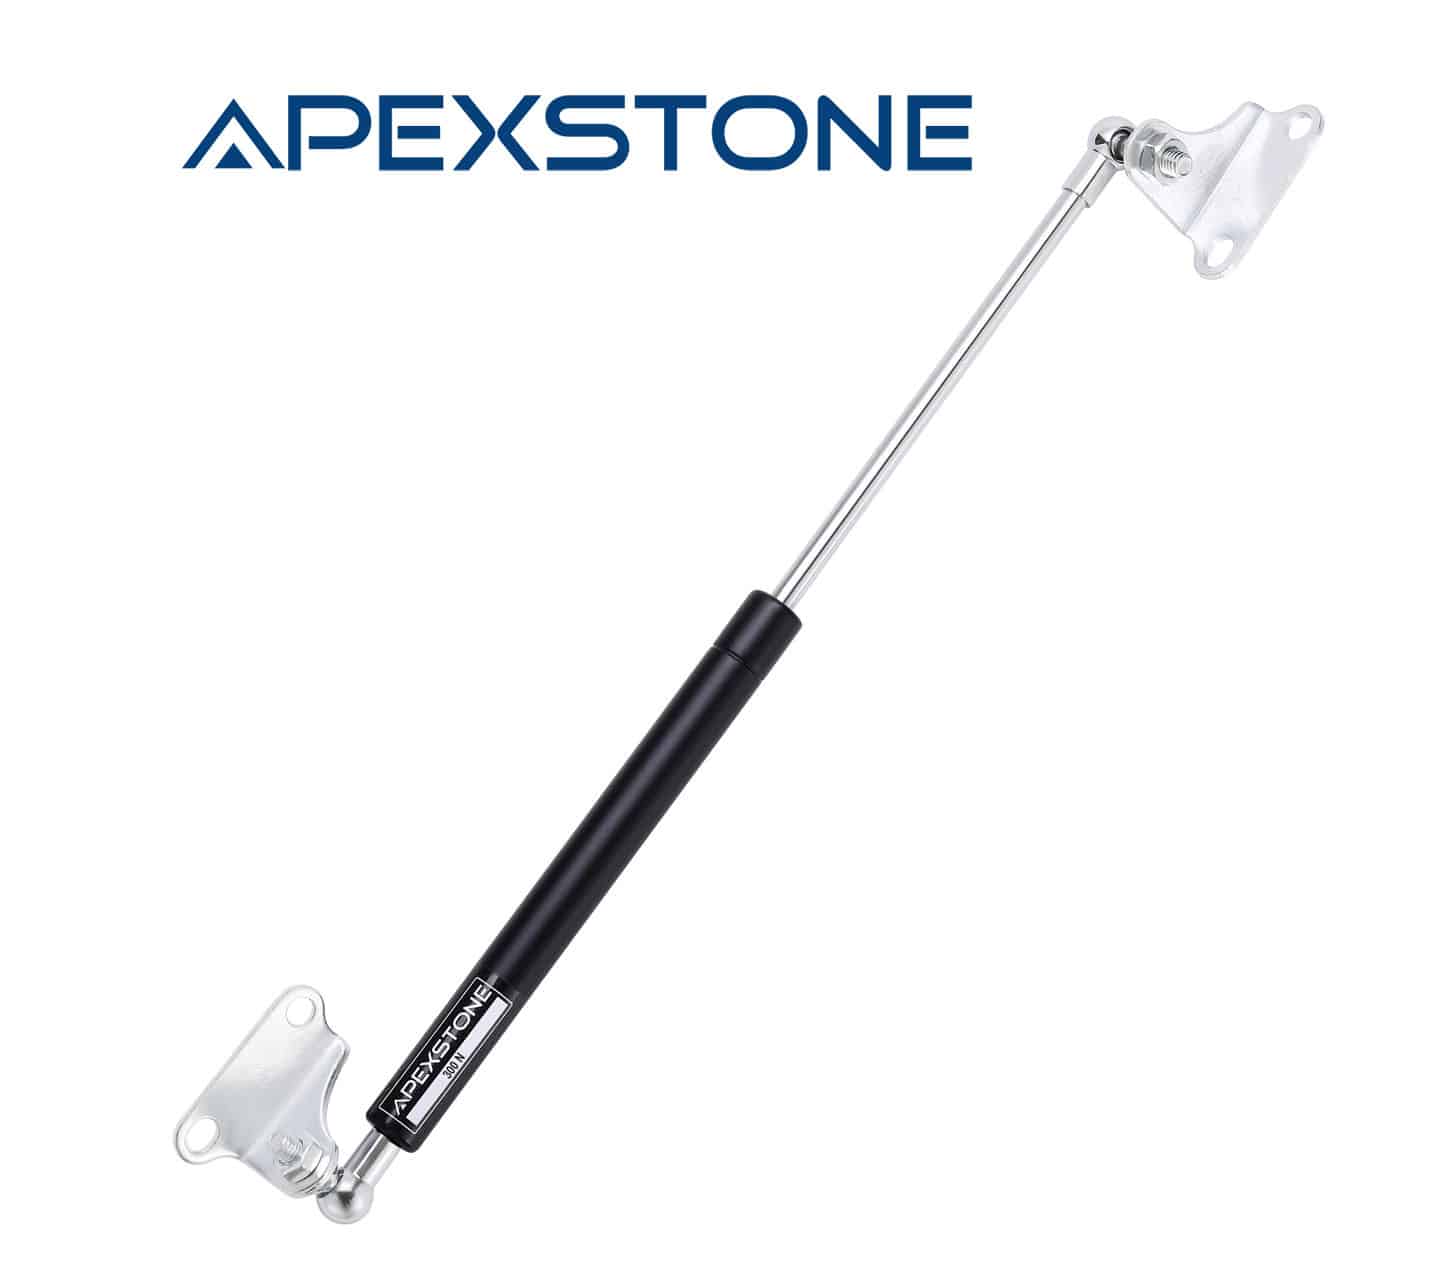 Apexstone 15 Inch 300N/67lb Gas Struts for Heavy Lid or RV Bed